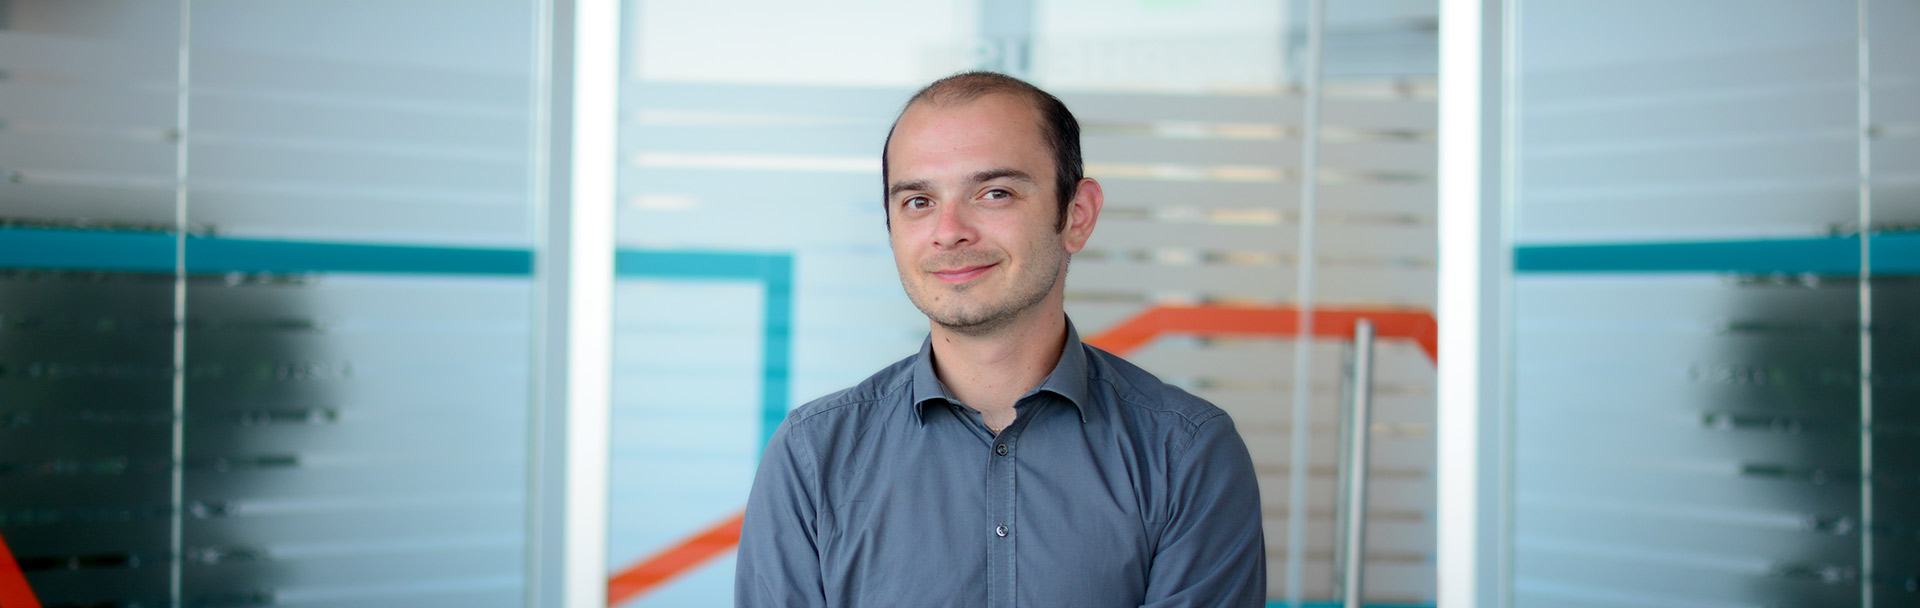 Career reflections: Eduard, Delivery Manager